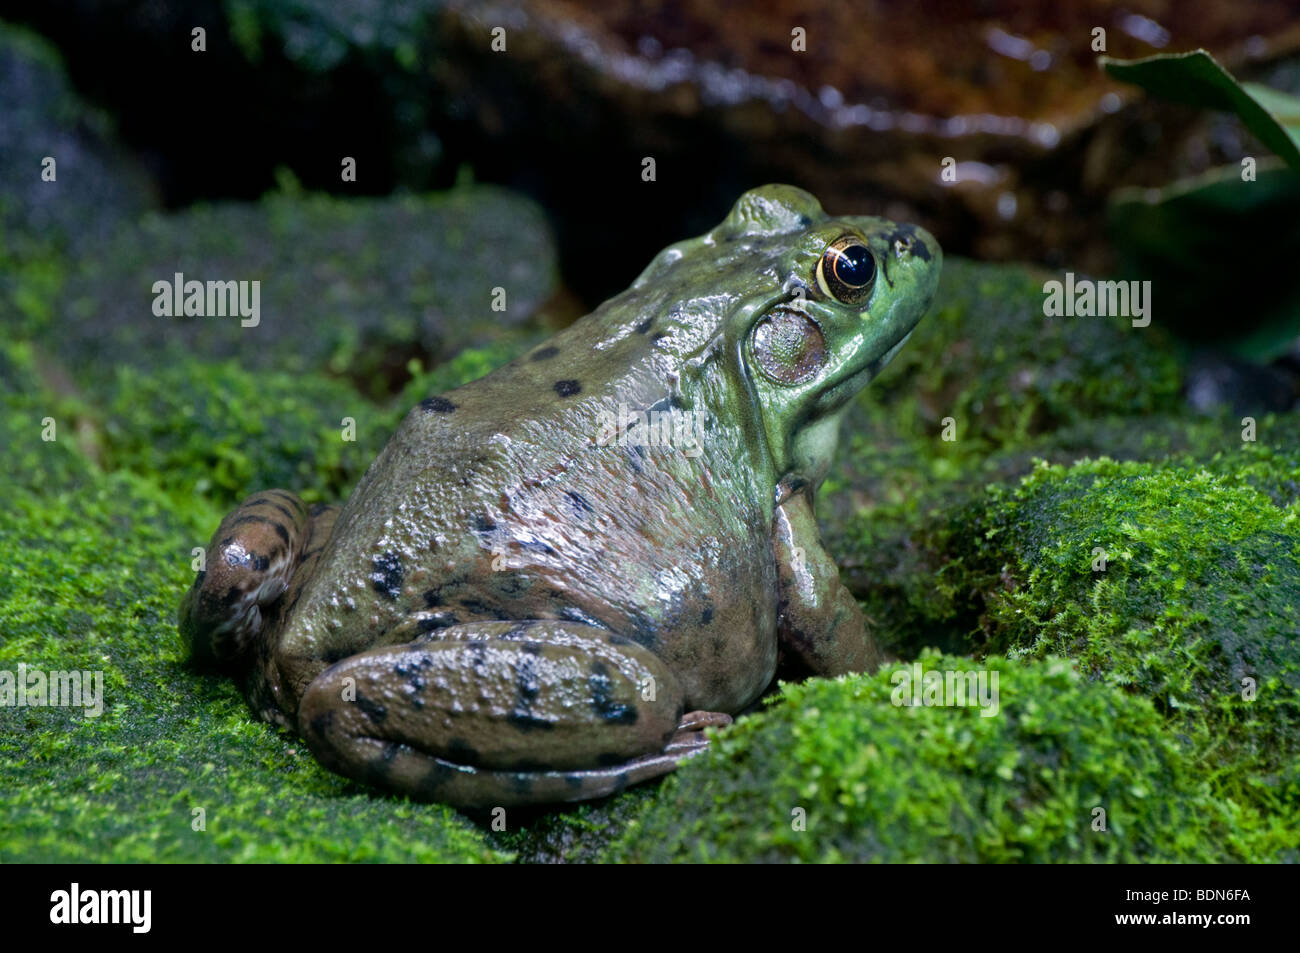 A Green Frog Stock Photo